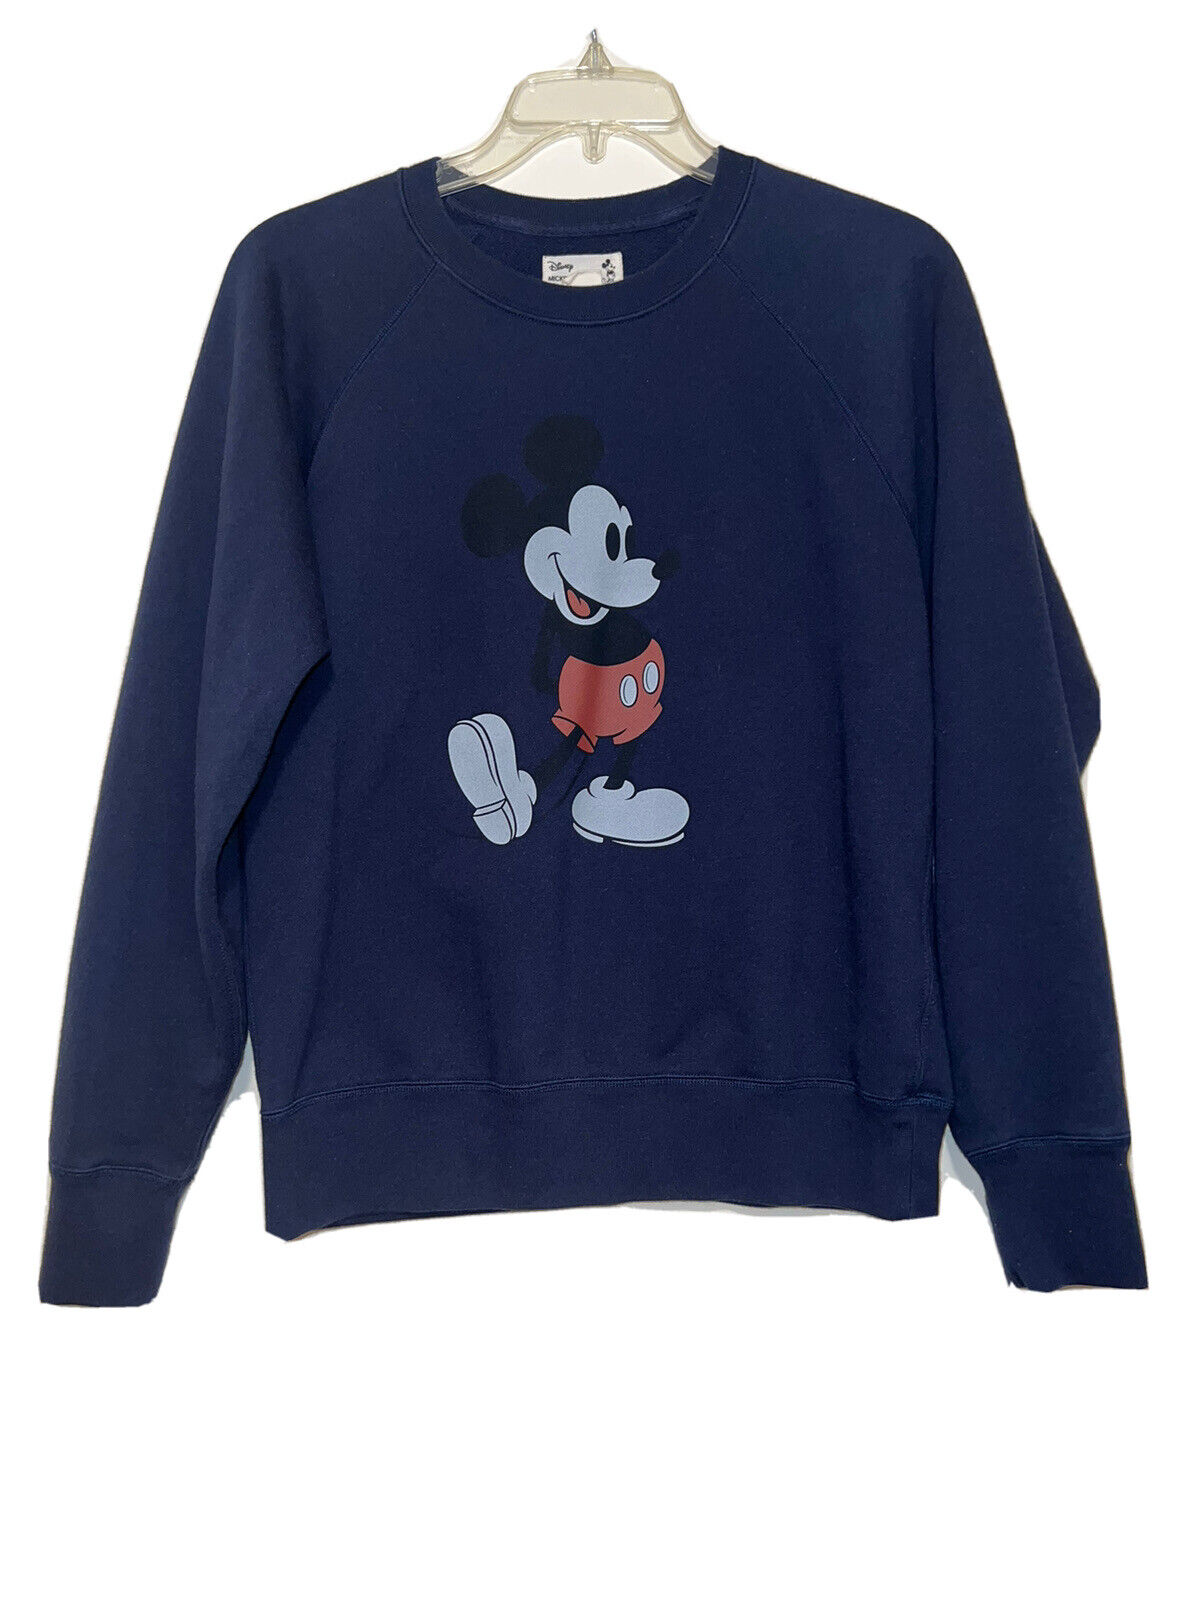 Uniqlo Disney Mickey Stands Mickey Mouse Navy Blue Pullover Sweatshirt Size M